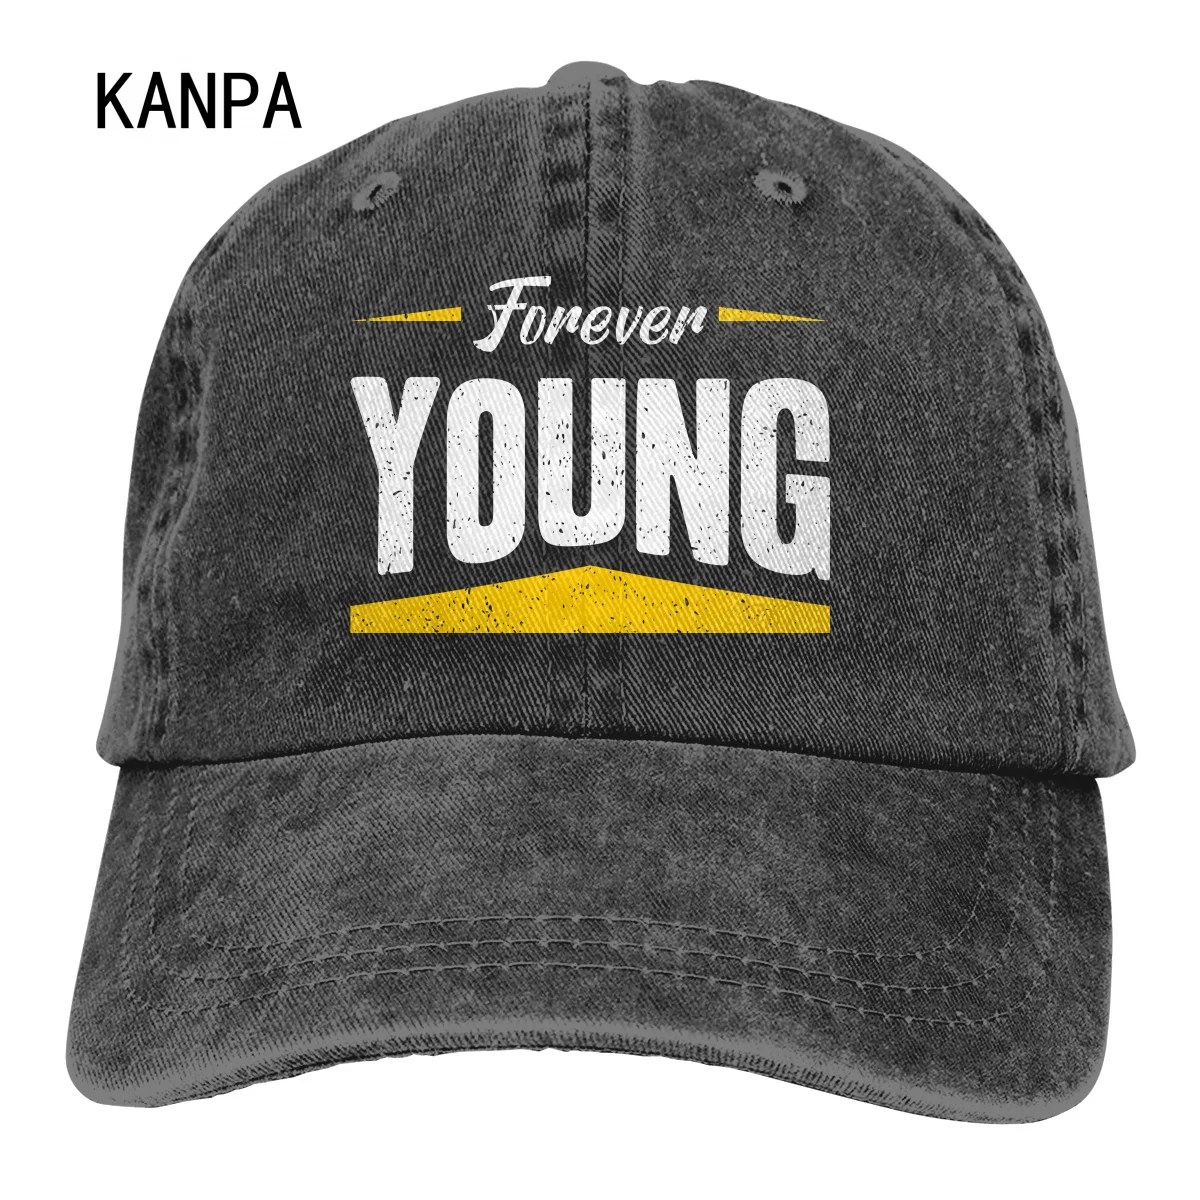 

Forever Young Men Women Denim Baseball Caps Teenage Boys Girls Casual Adjustable Washed Cotton Hats Summer Sun Protection Caps